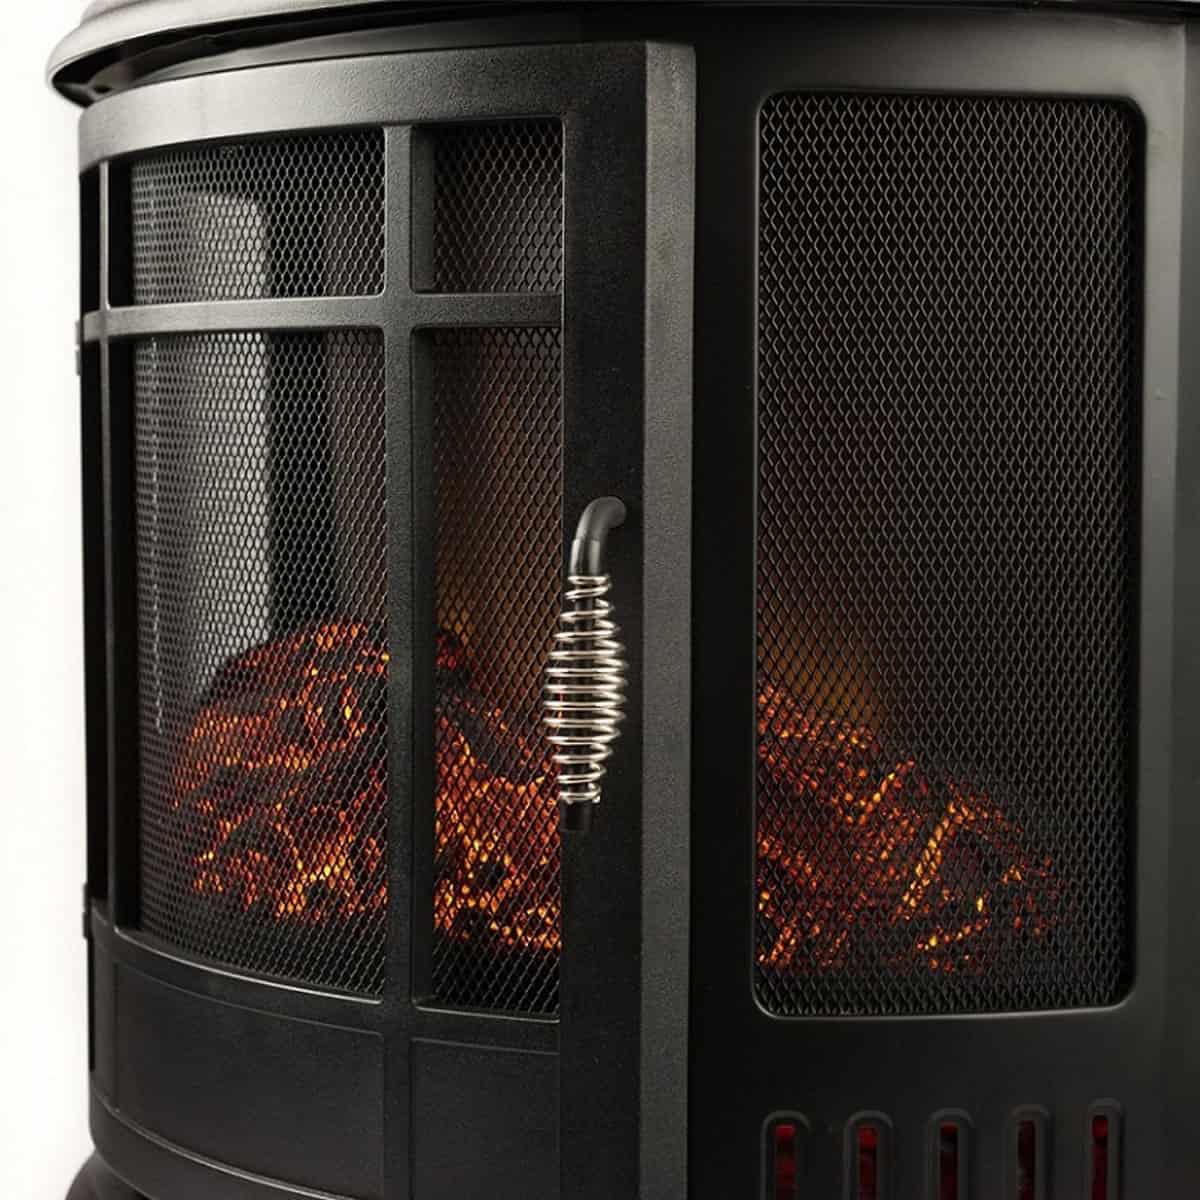 Moda Flame Lw8050crv Mf 22 In Heater Vent Free Curved Electric Fireplace Stove Fireplacess Com